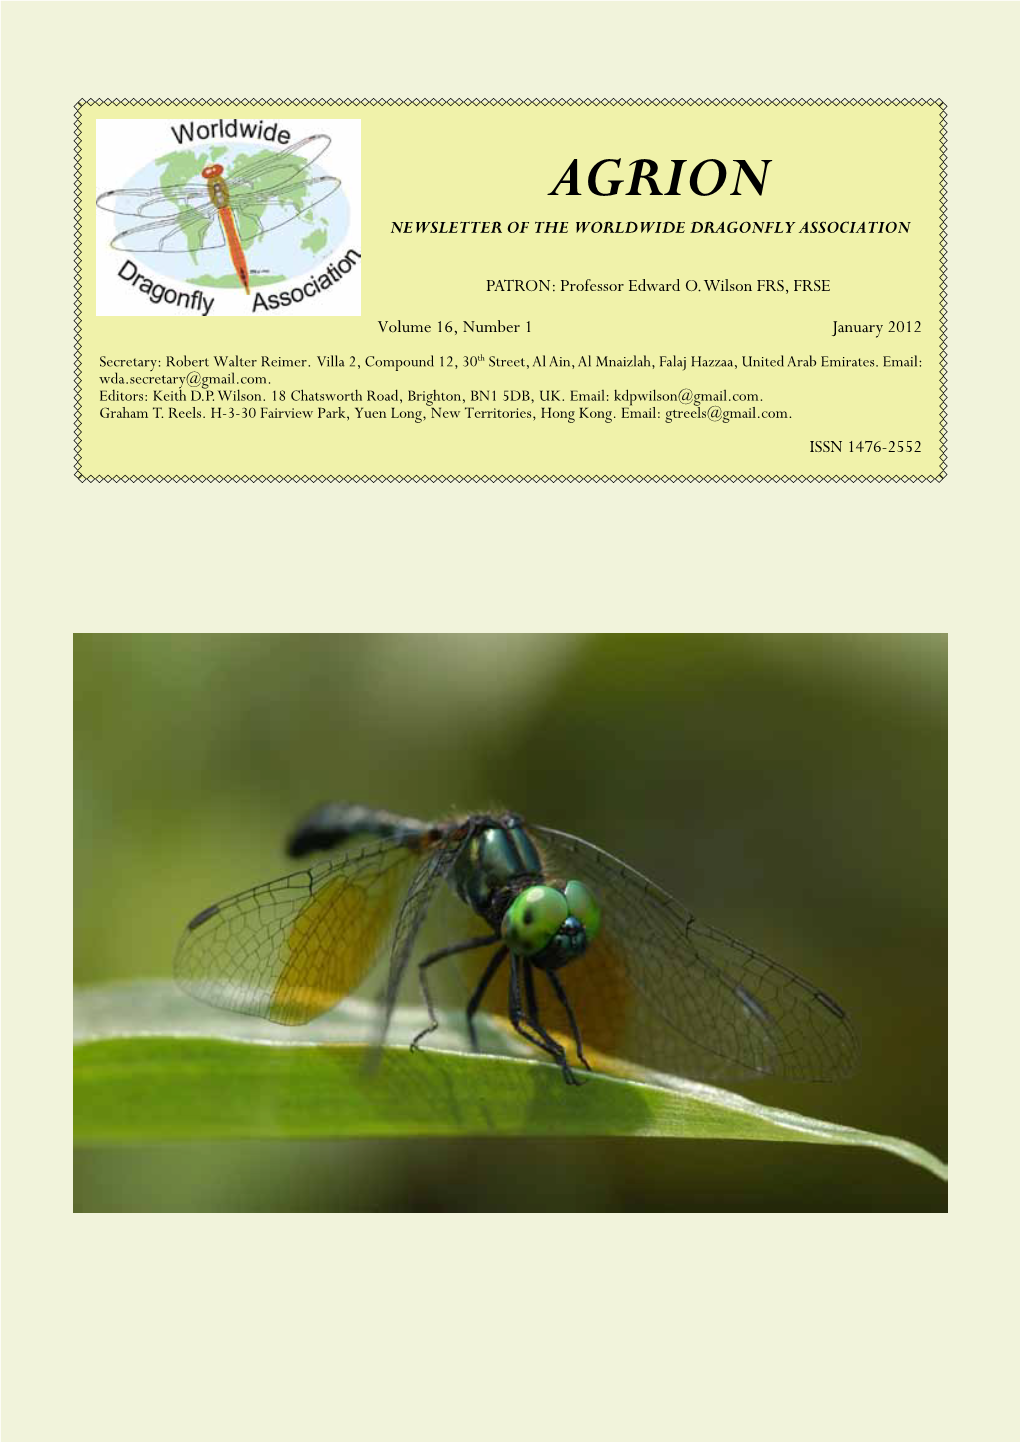 Agrion Newsletter of the Worldwide Dragonfly Association